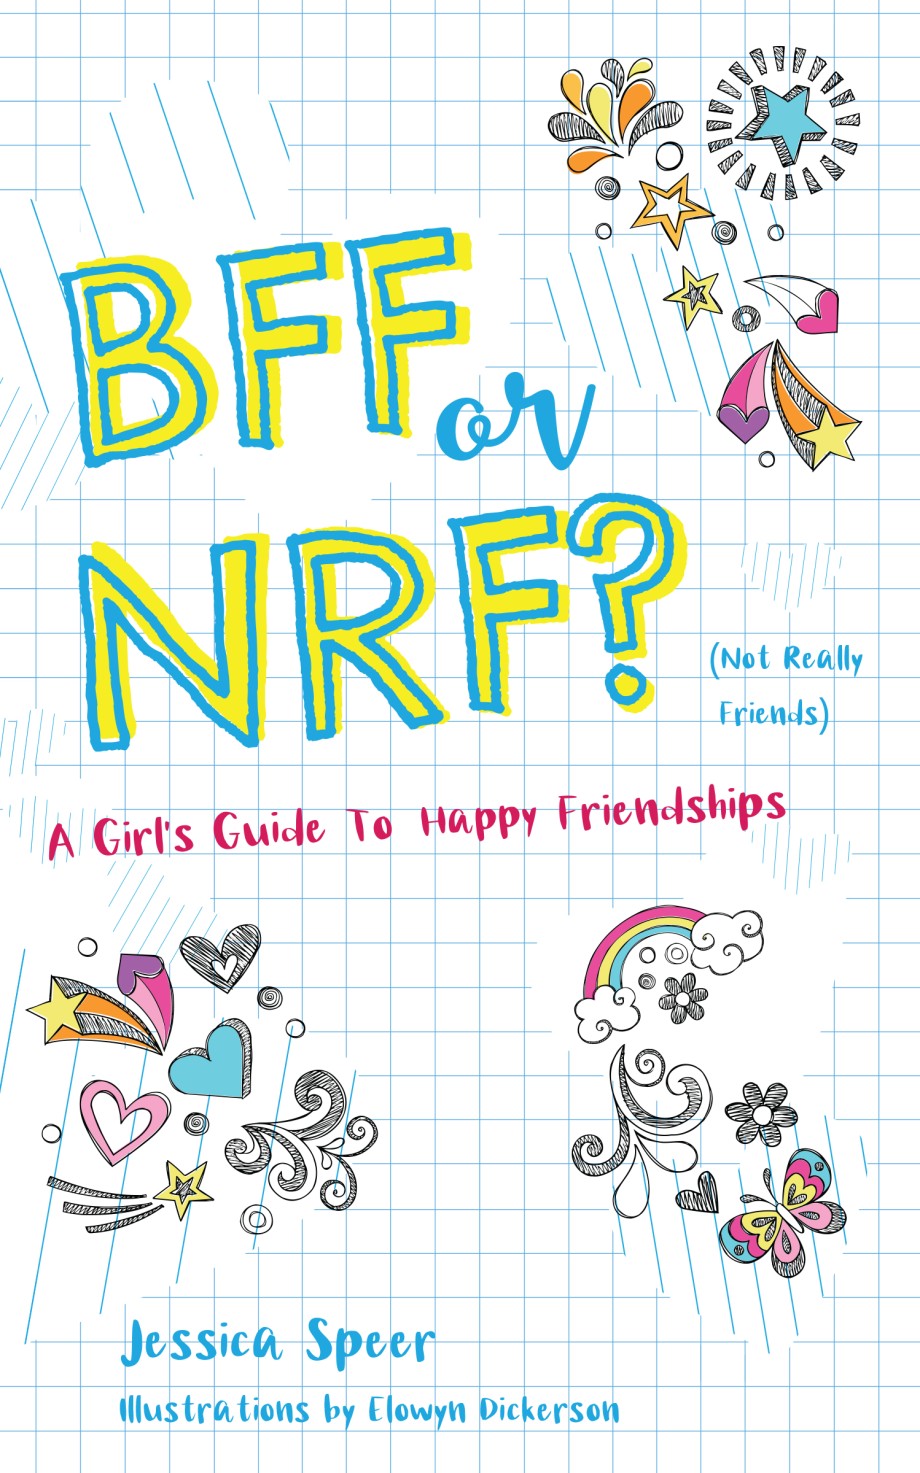 BFF or NRF (Not Really Friends) A Girl's Guide to Happy Friendships